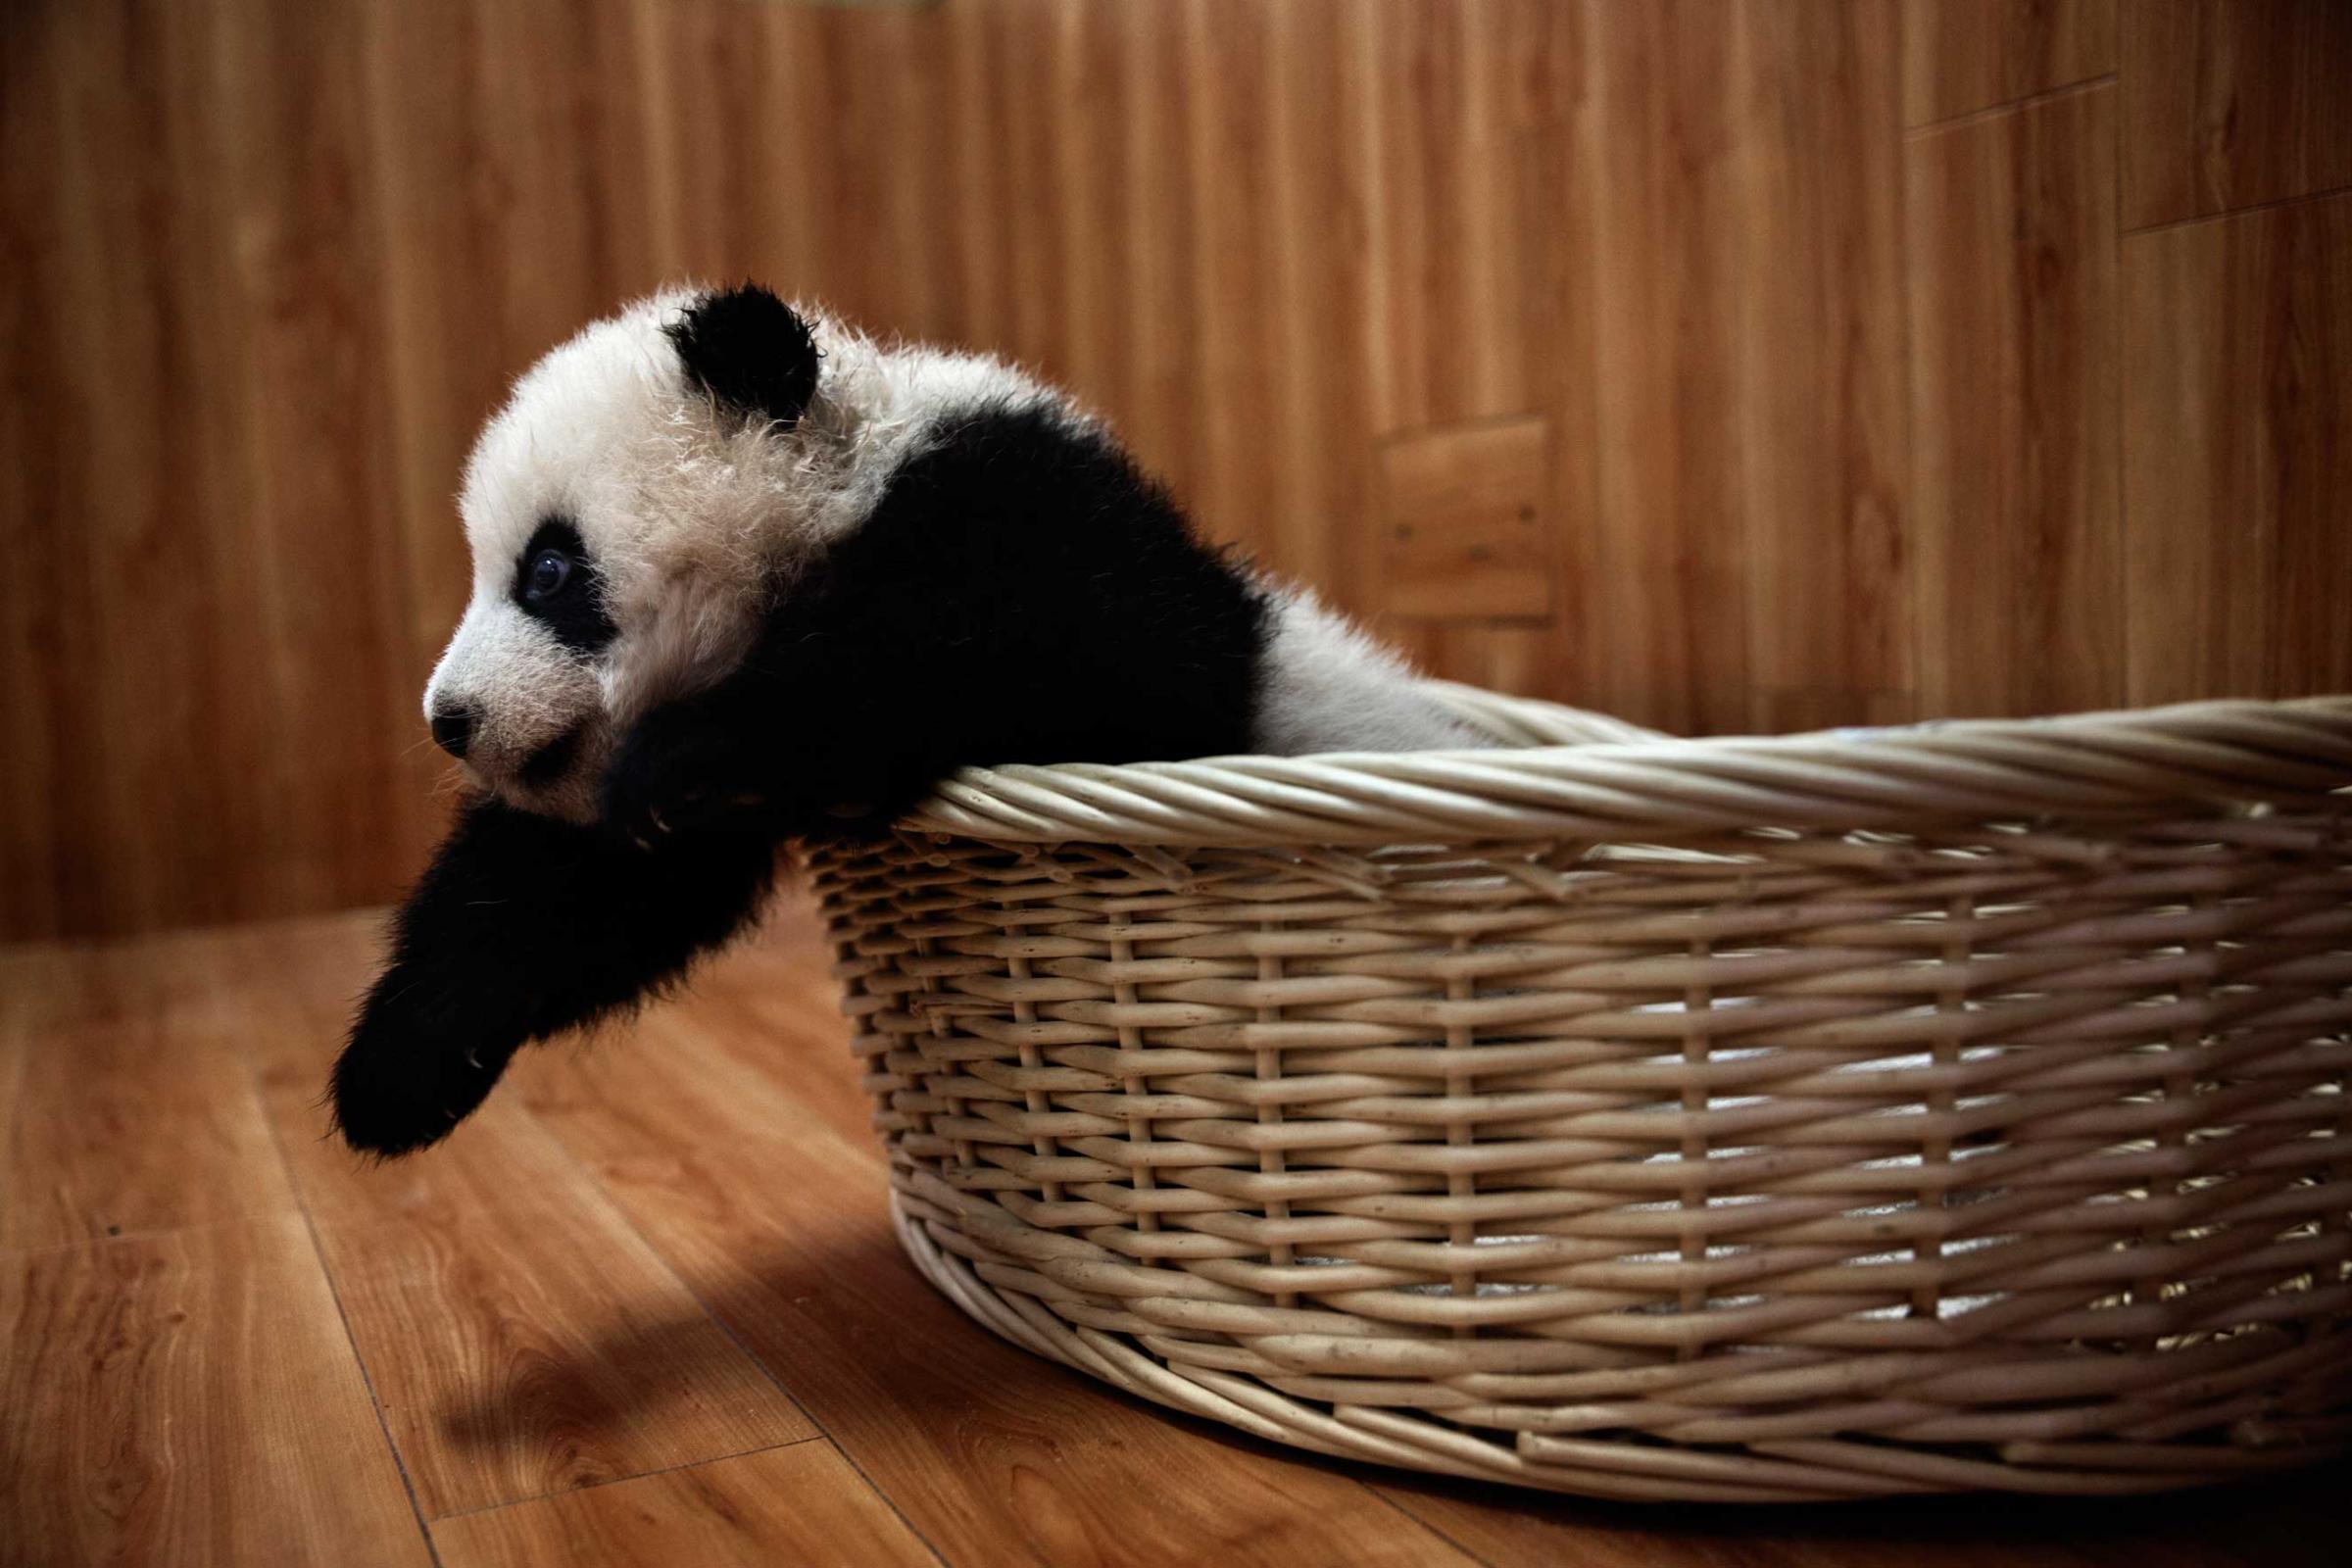 A baby panda rests after feeding time in the nursery at the Bifengxia Panda Base in Ya’an, Sichuan Province, China, Dec. 3, 2015.